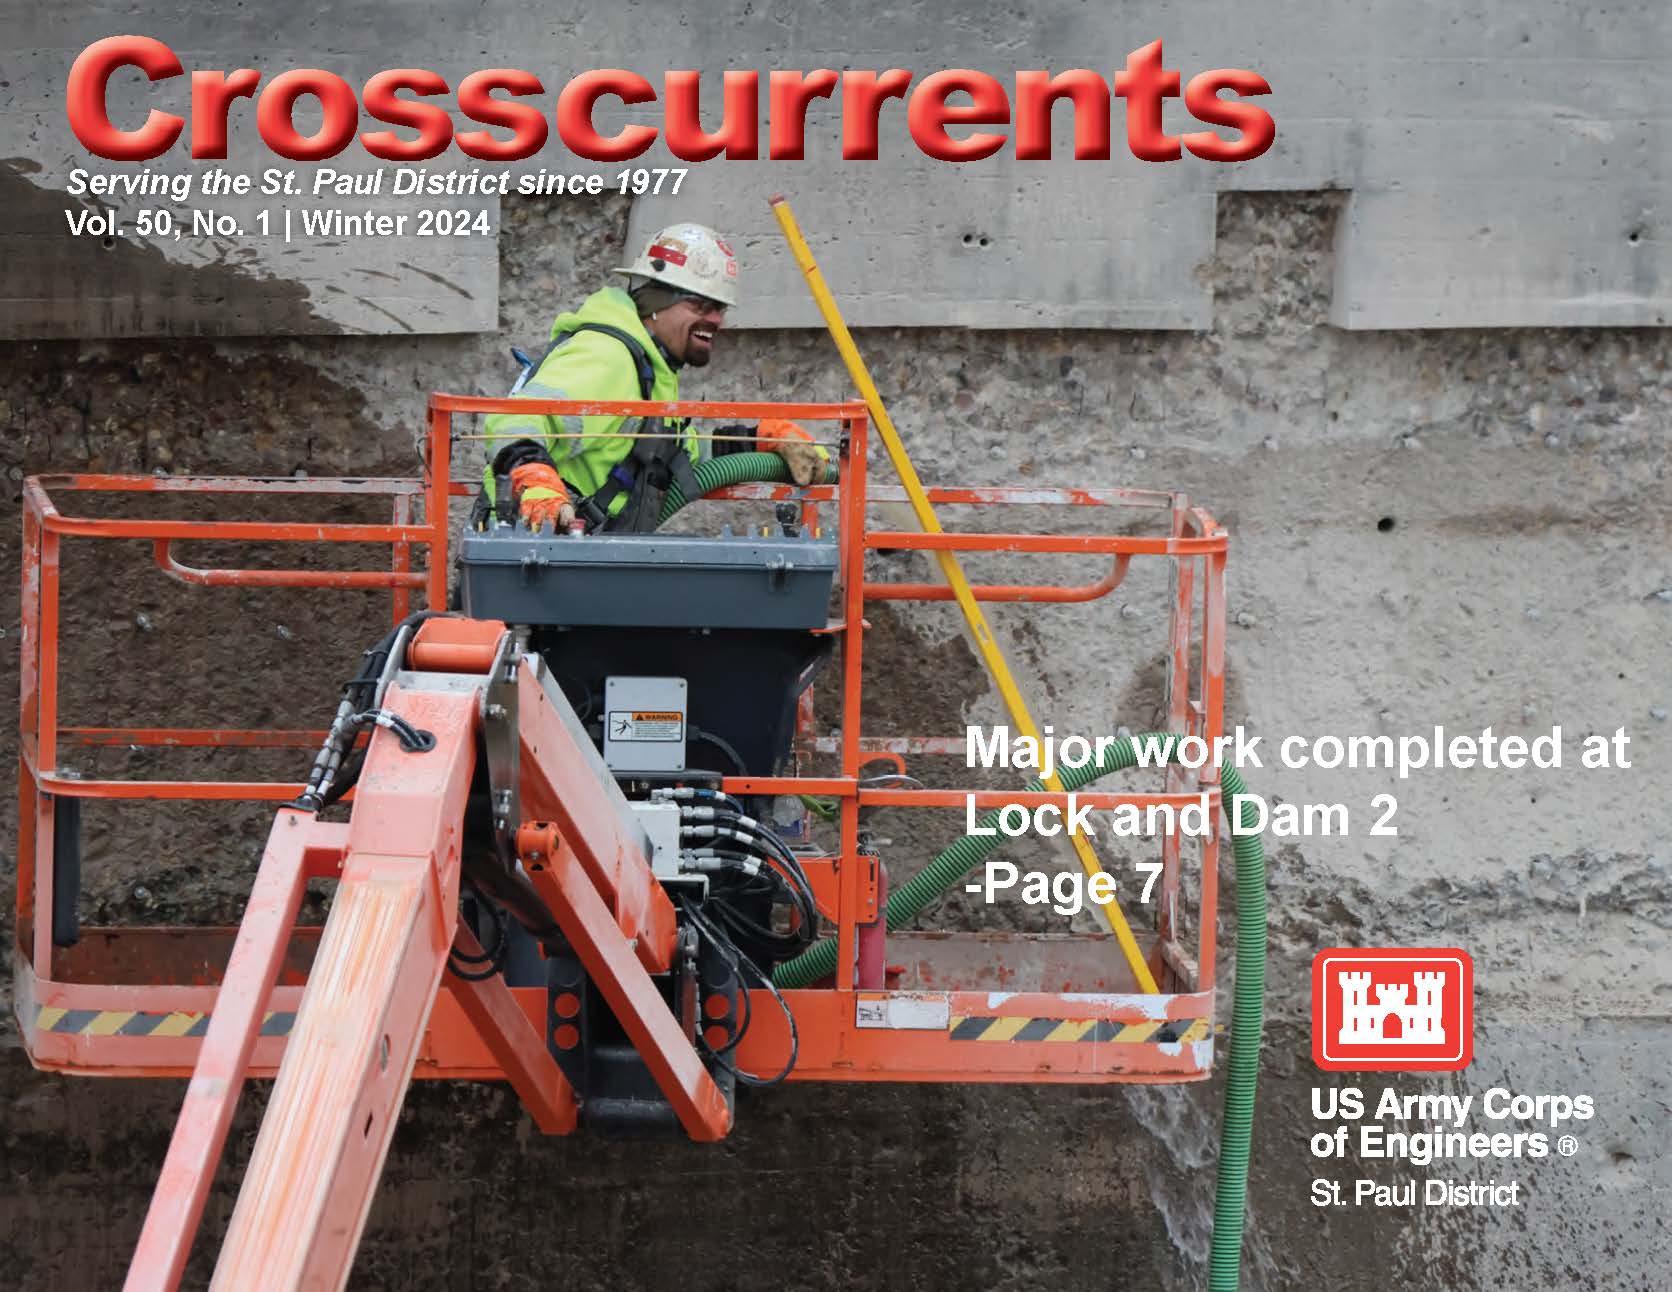 The cover of the Winter 2024 issue of Crosscurrents. 